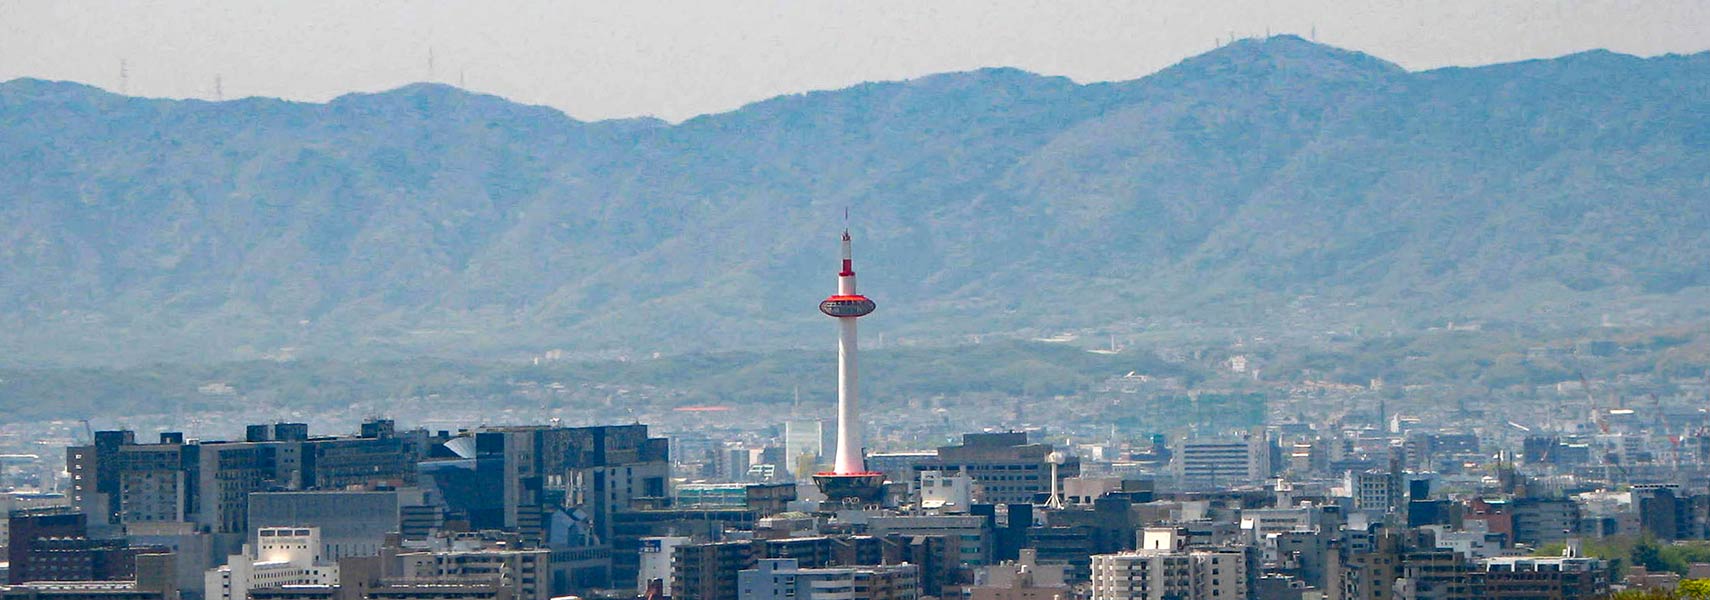 Kyoto City with Kyoto tower